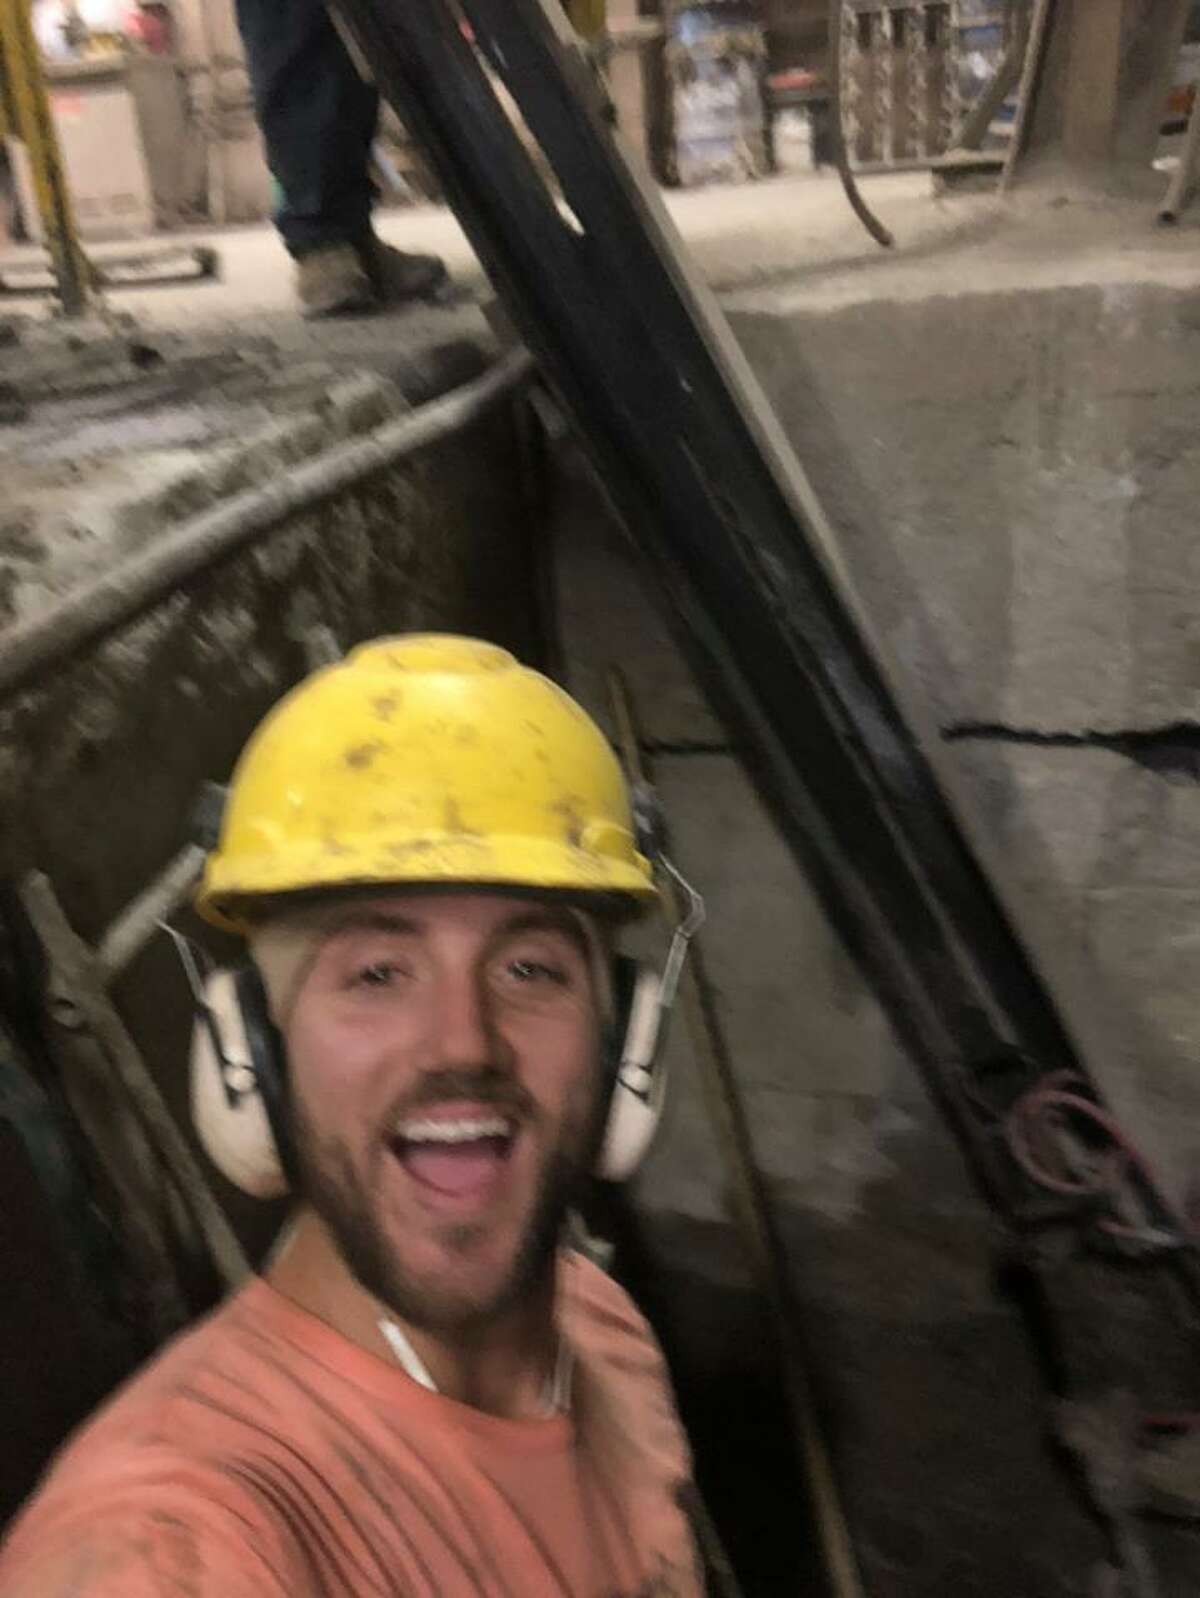 A photo Daniel Kendrick took of himself on the job in October 2018.